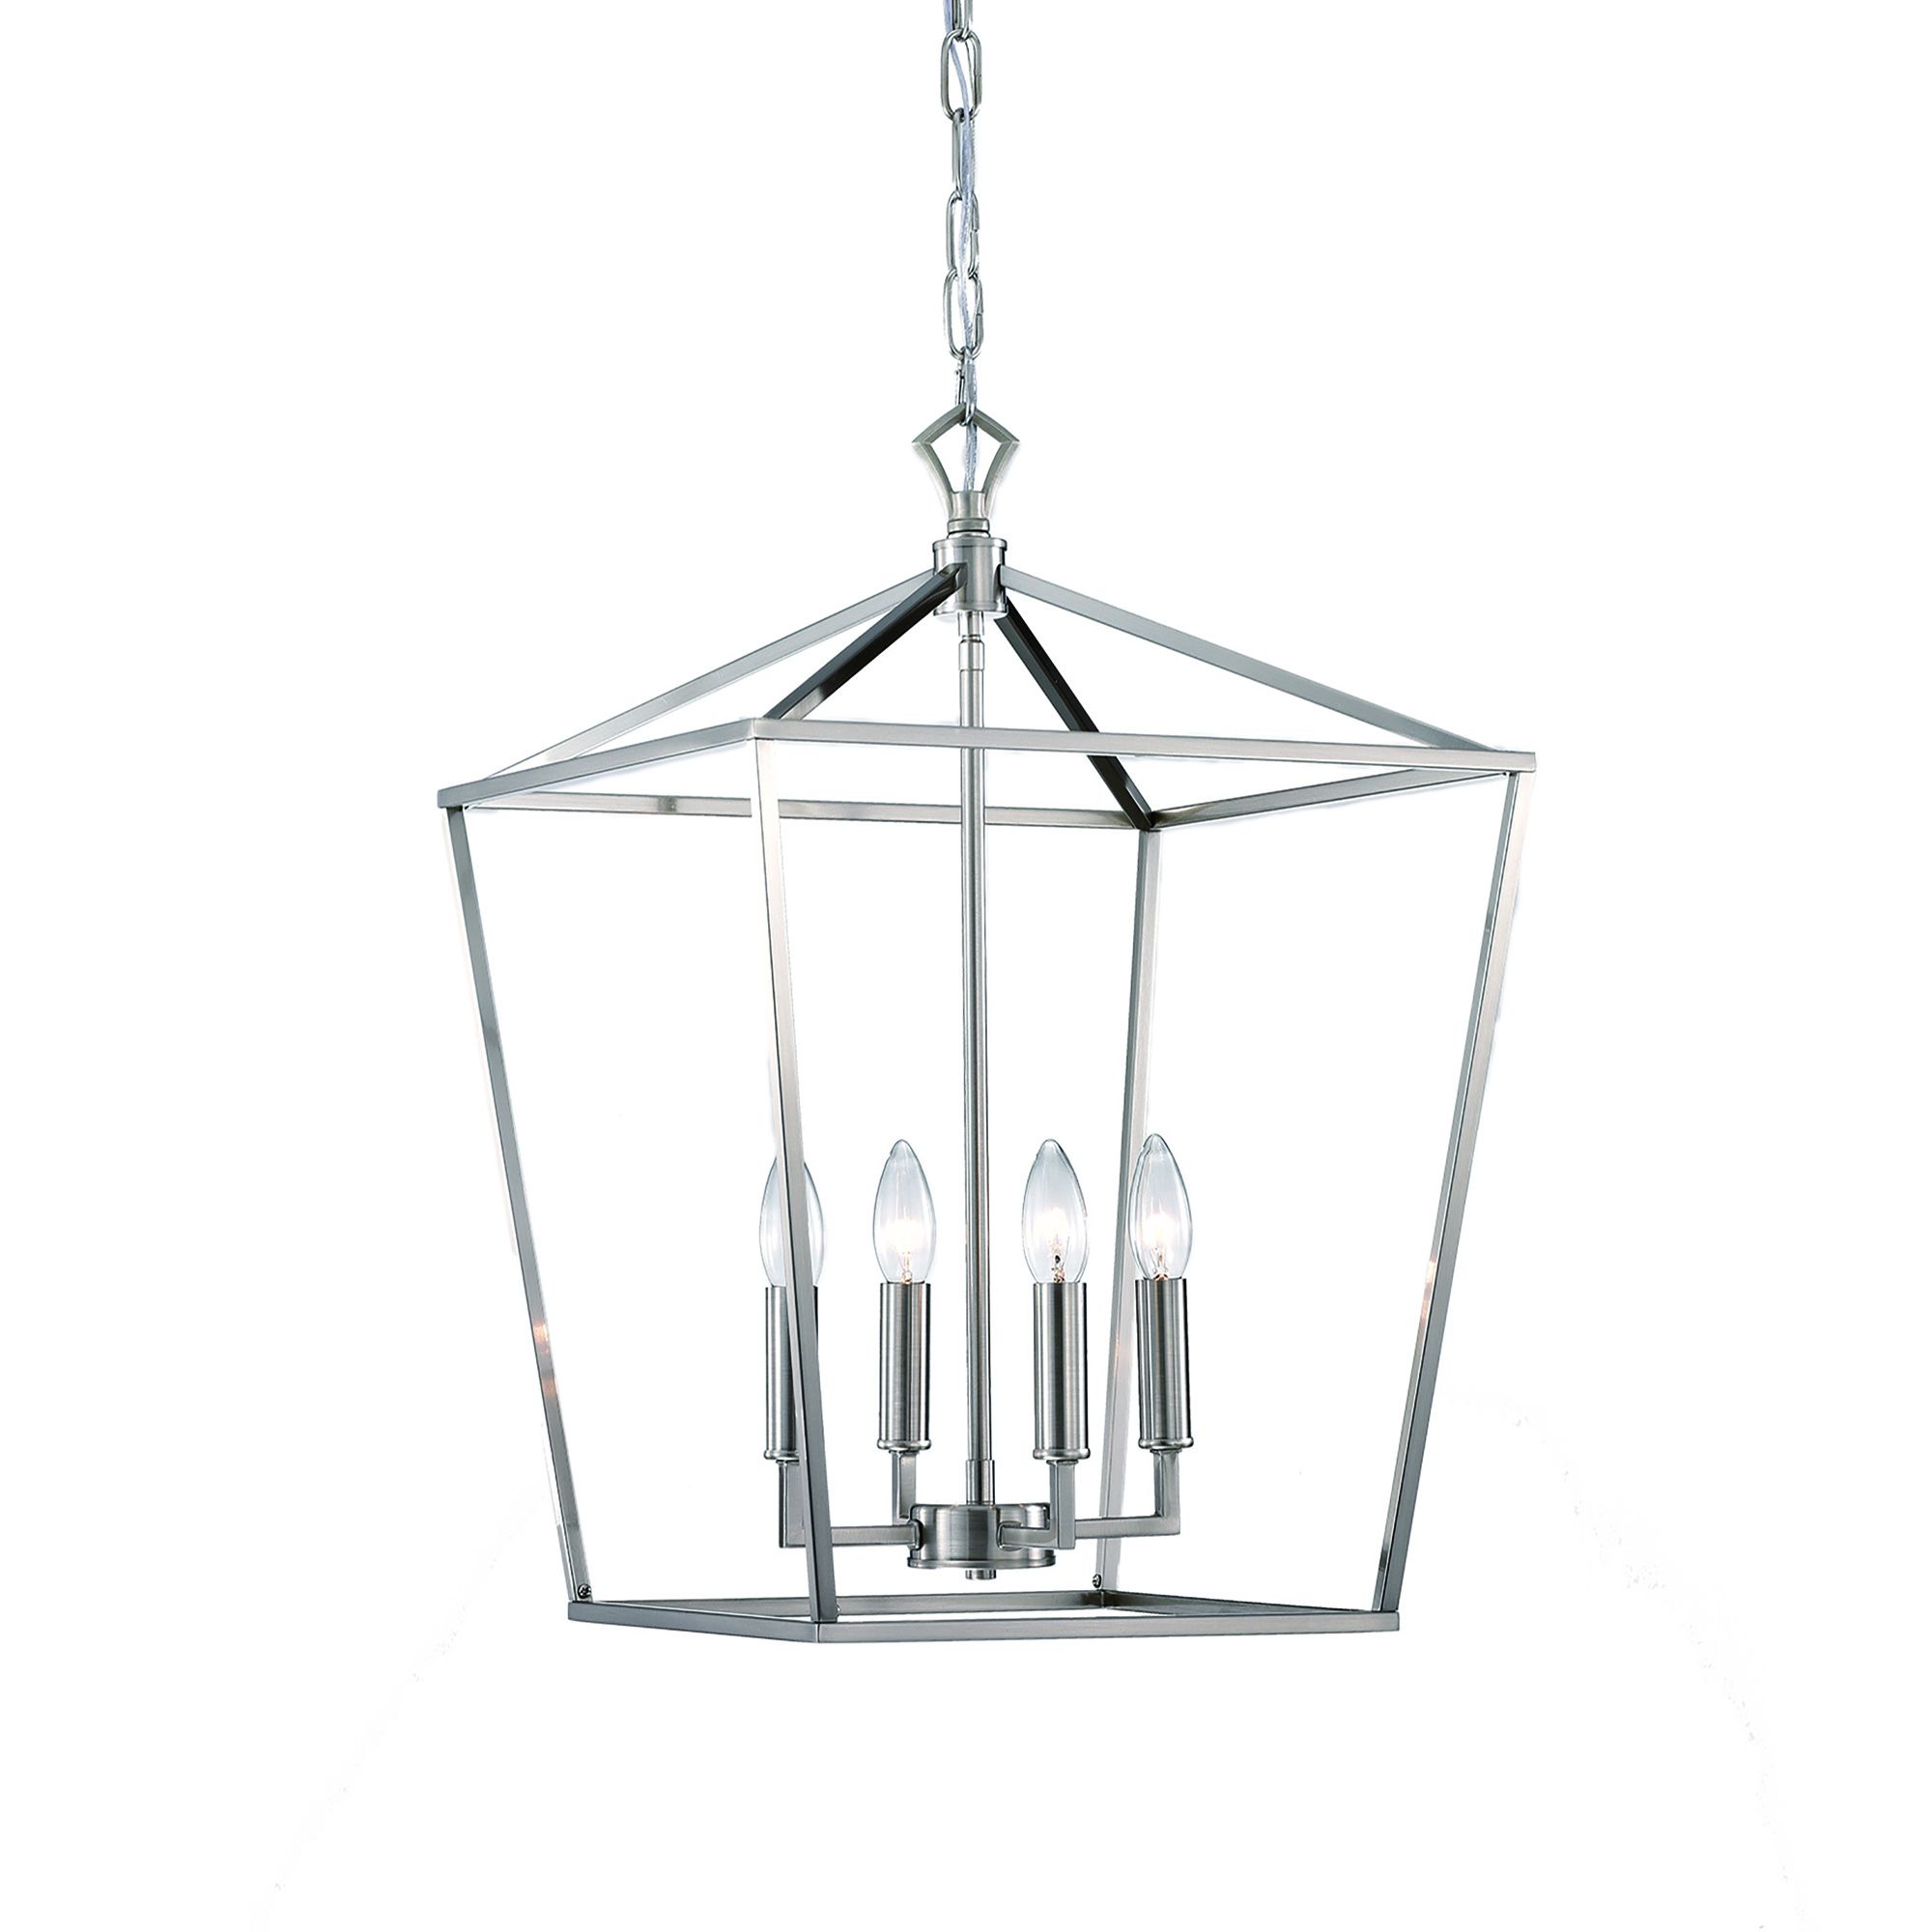 4 Light Brushed Nickel Lantern Pendant Chandelier 16 In – Edvivi Lighting With Regard To Most Current Satin Nickel Lantern Chandeliers (View 7 of 13)